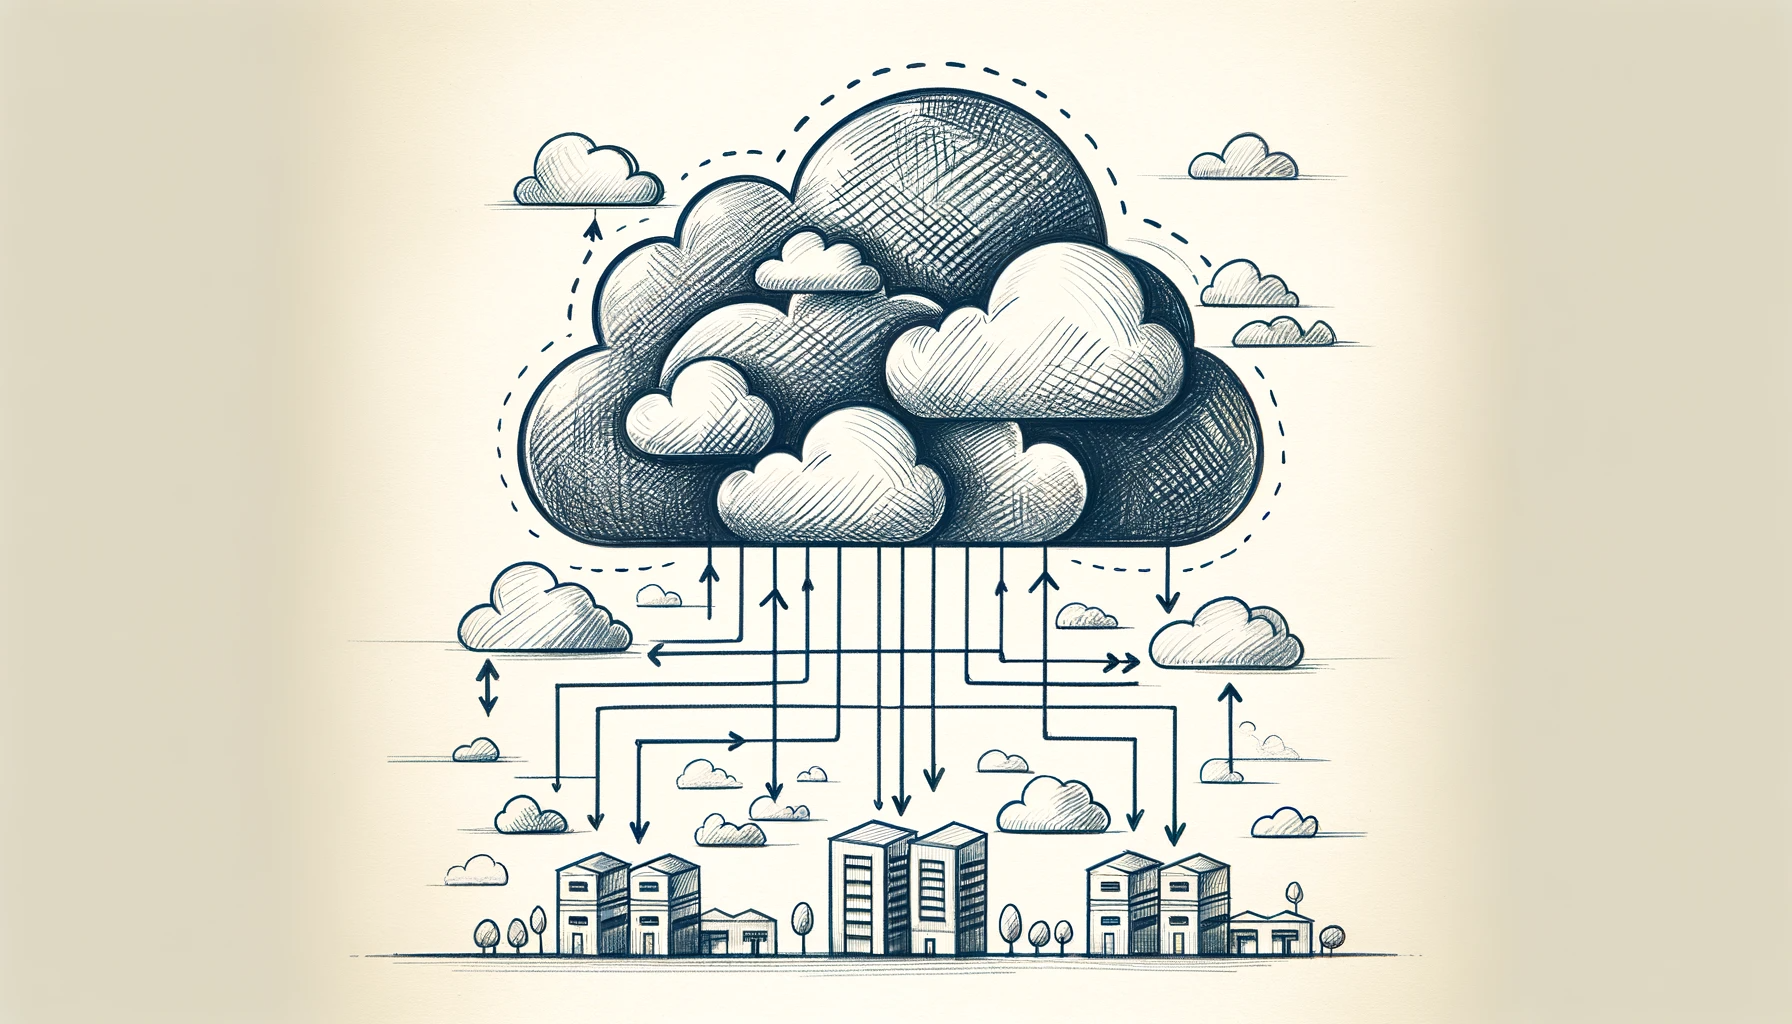 Hybrid Multi-Cloud is the Future Infrastructure